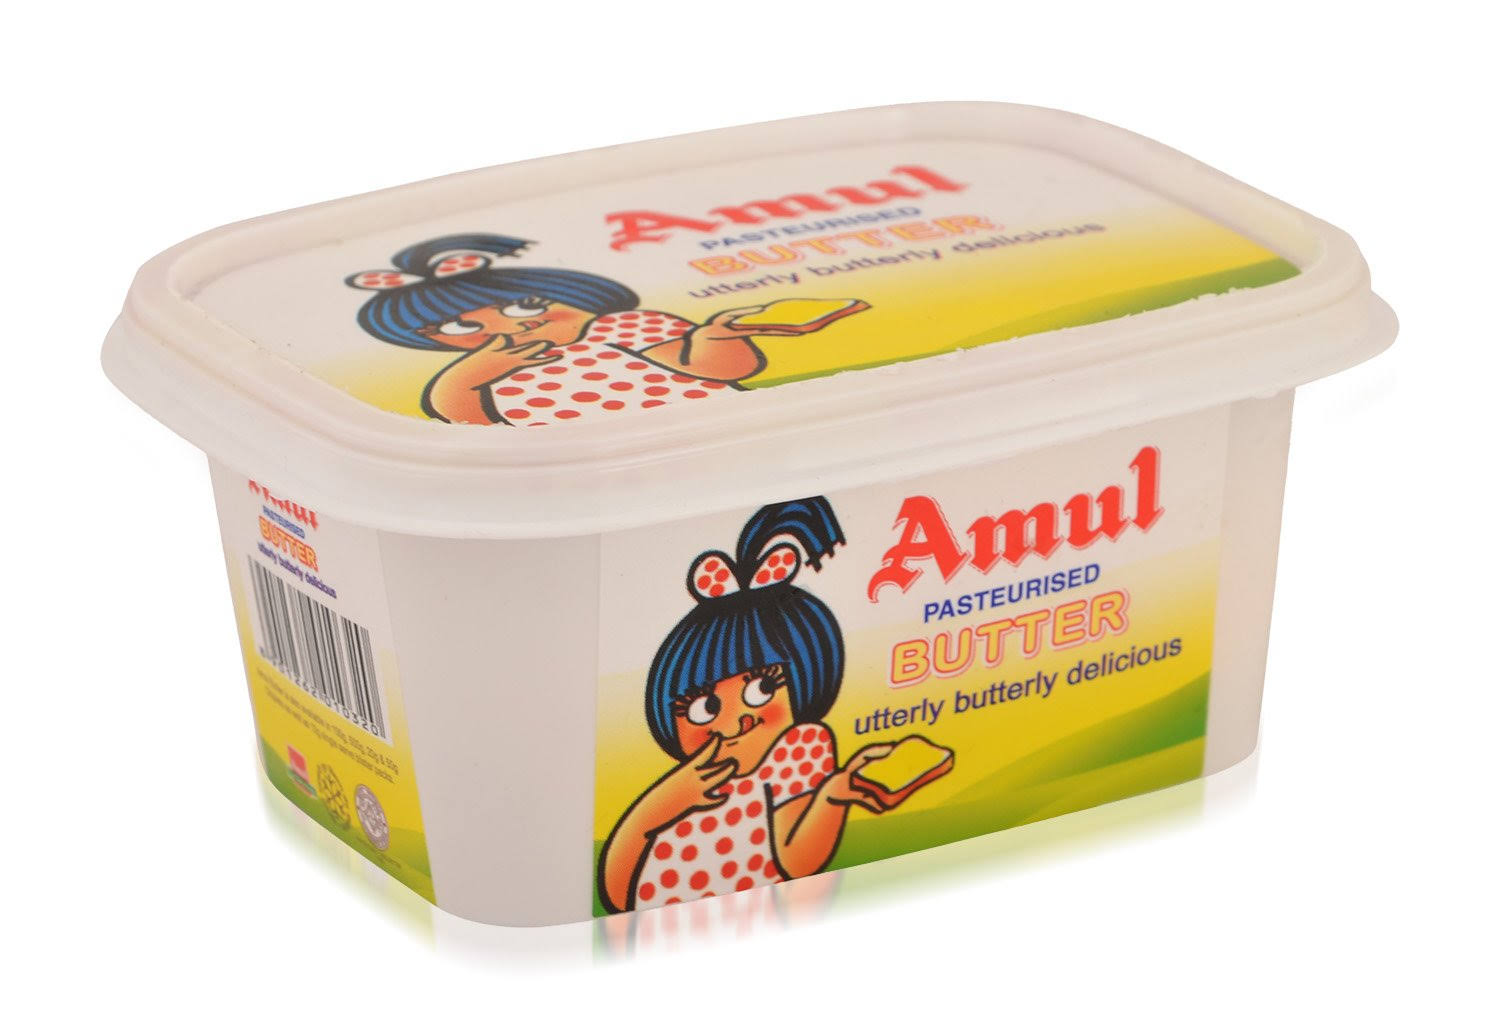 Amul Water Buffalo or Cow Milk Salted Butter